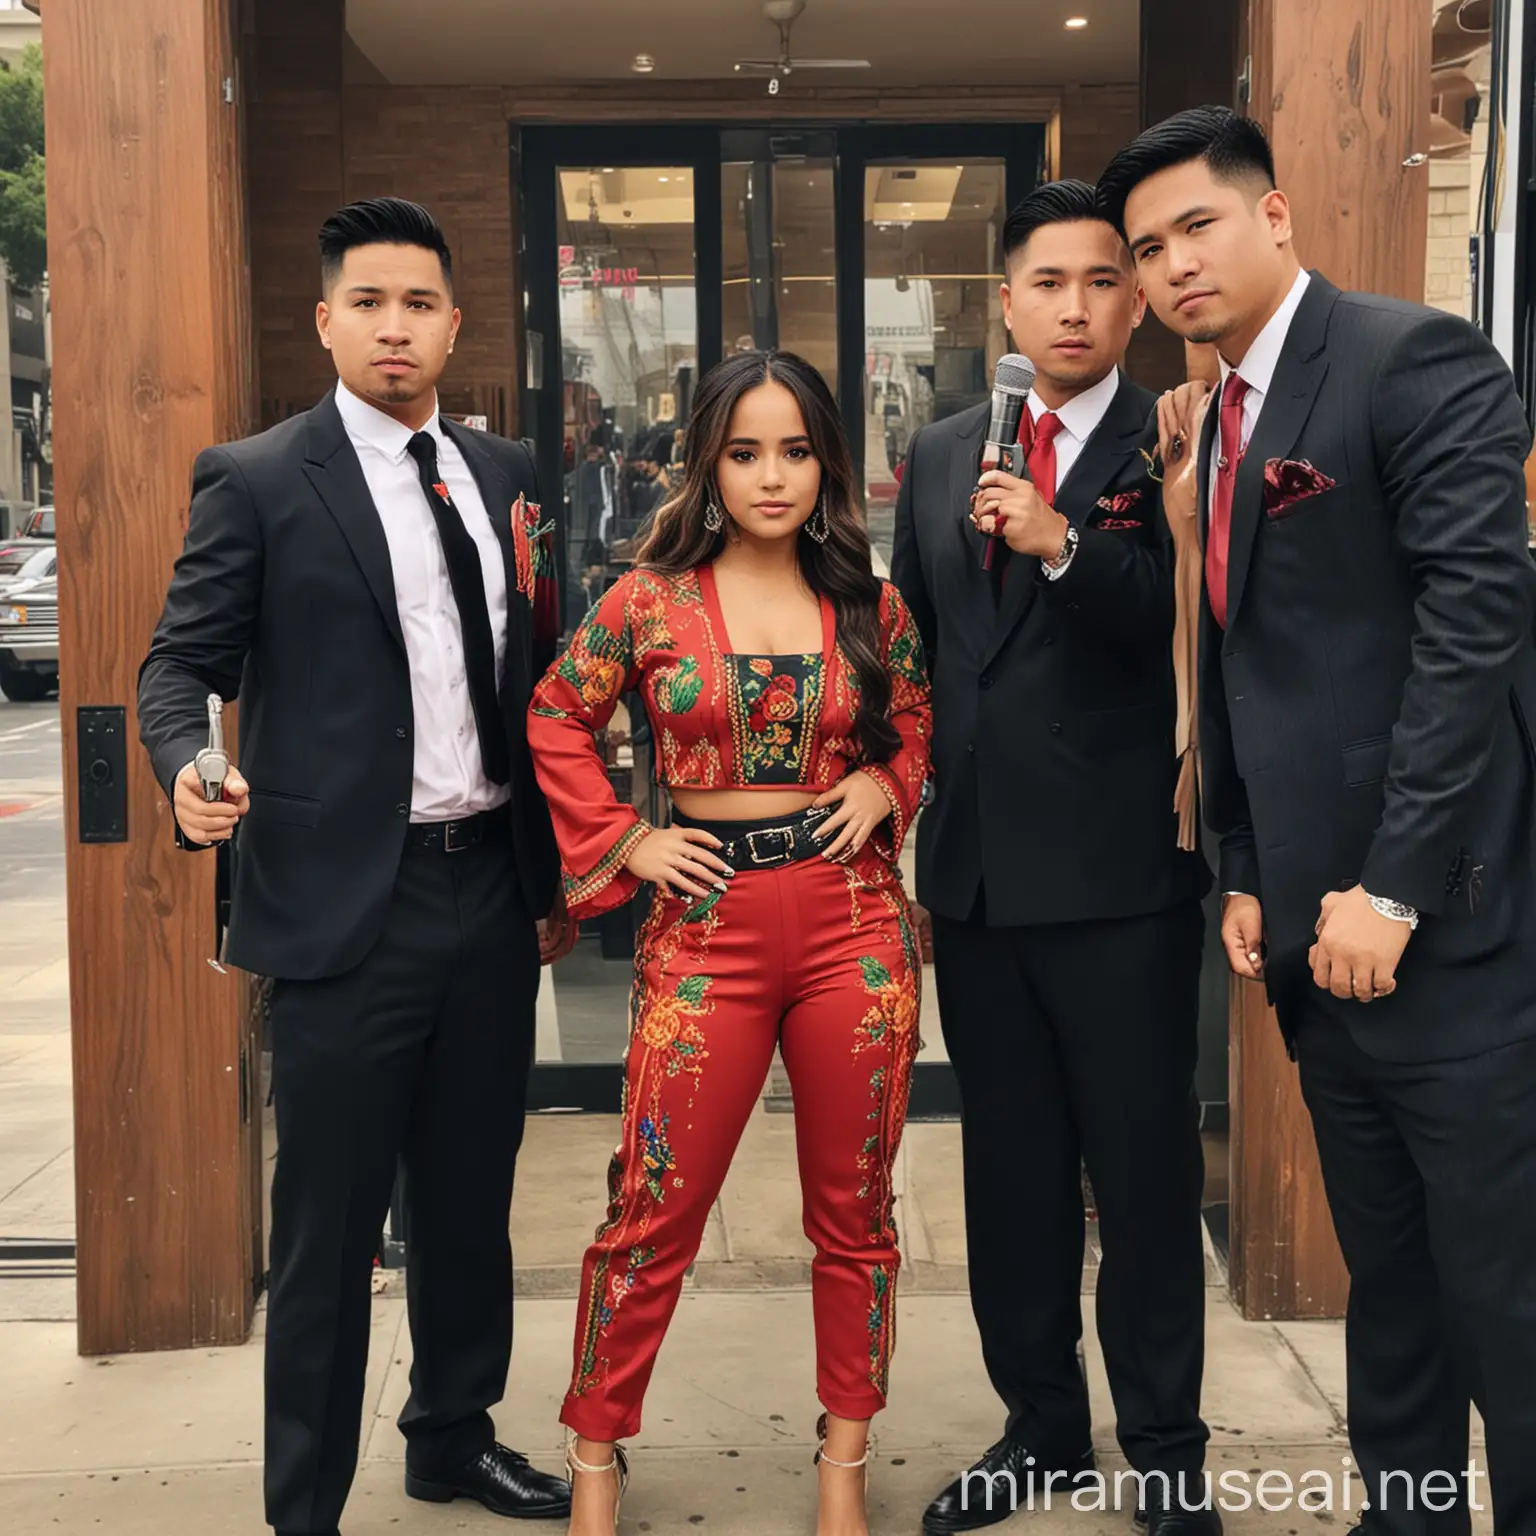 Becky G wearing a Mexican colors outfit, with a microphone in one hand.
Behind her, two strong Chinese men  wearing black executive suits, and holding guns in their hands.
All of them at a clothing store door. 